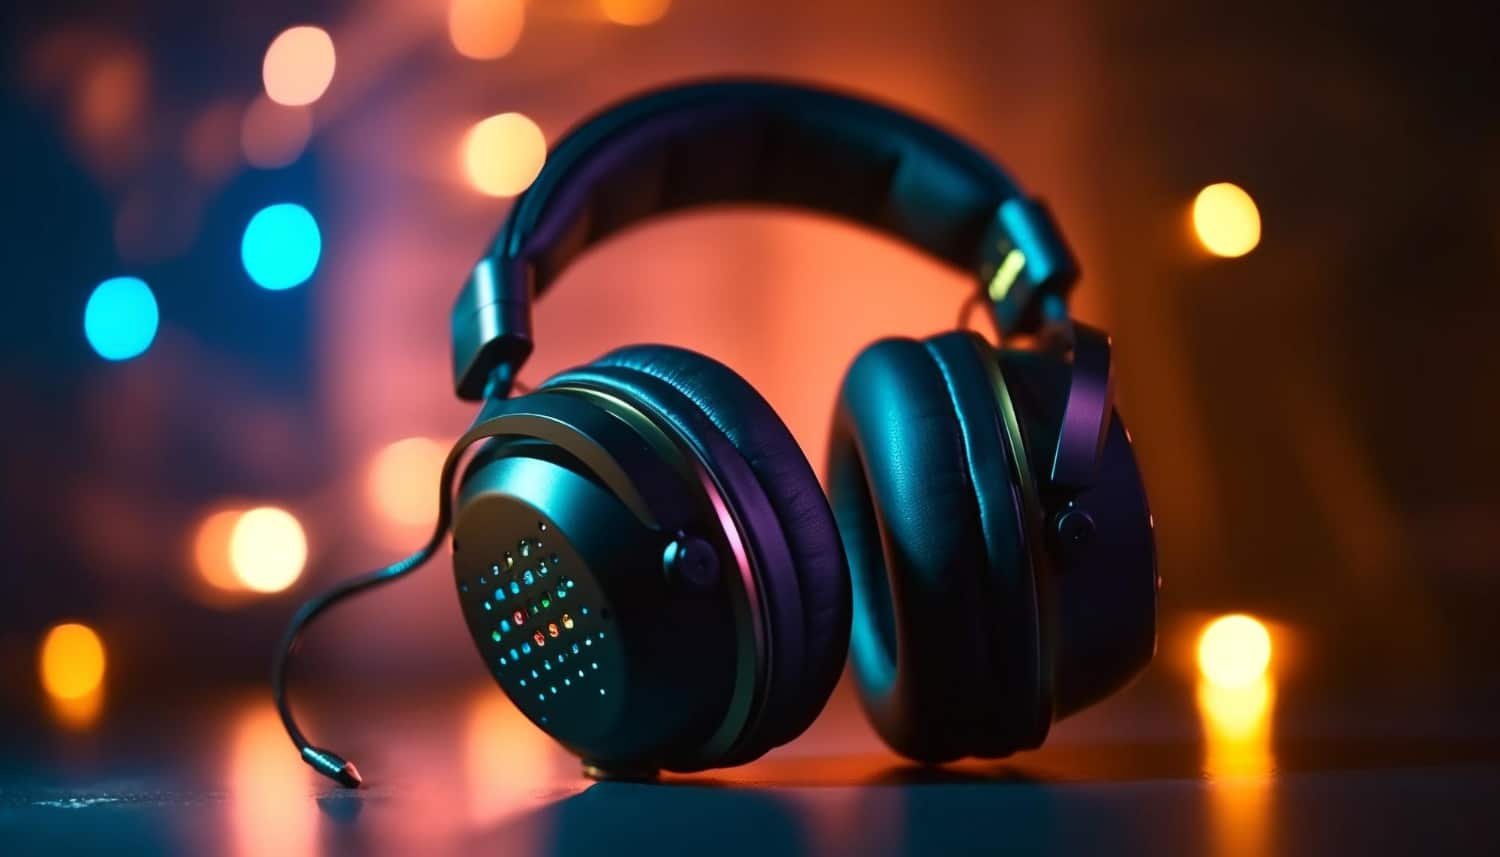 Listen To Premium Sound With Skullcandy’s High-Quality Audio Products